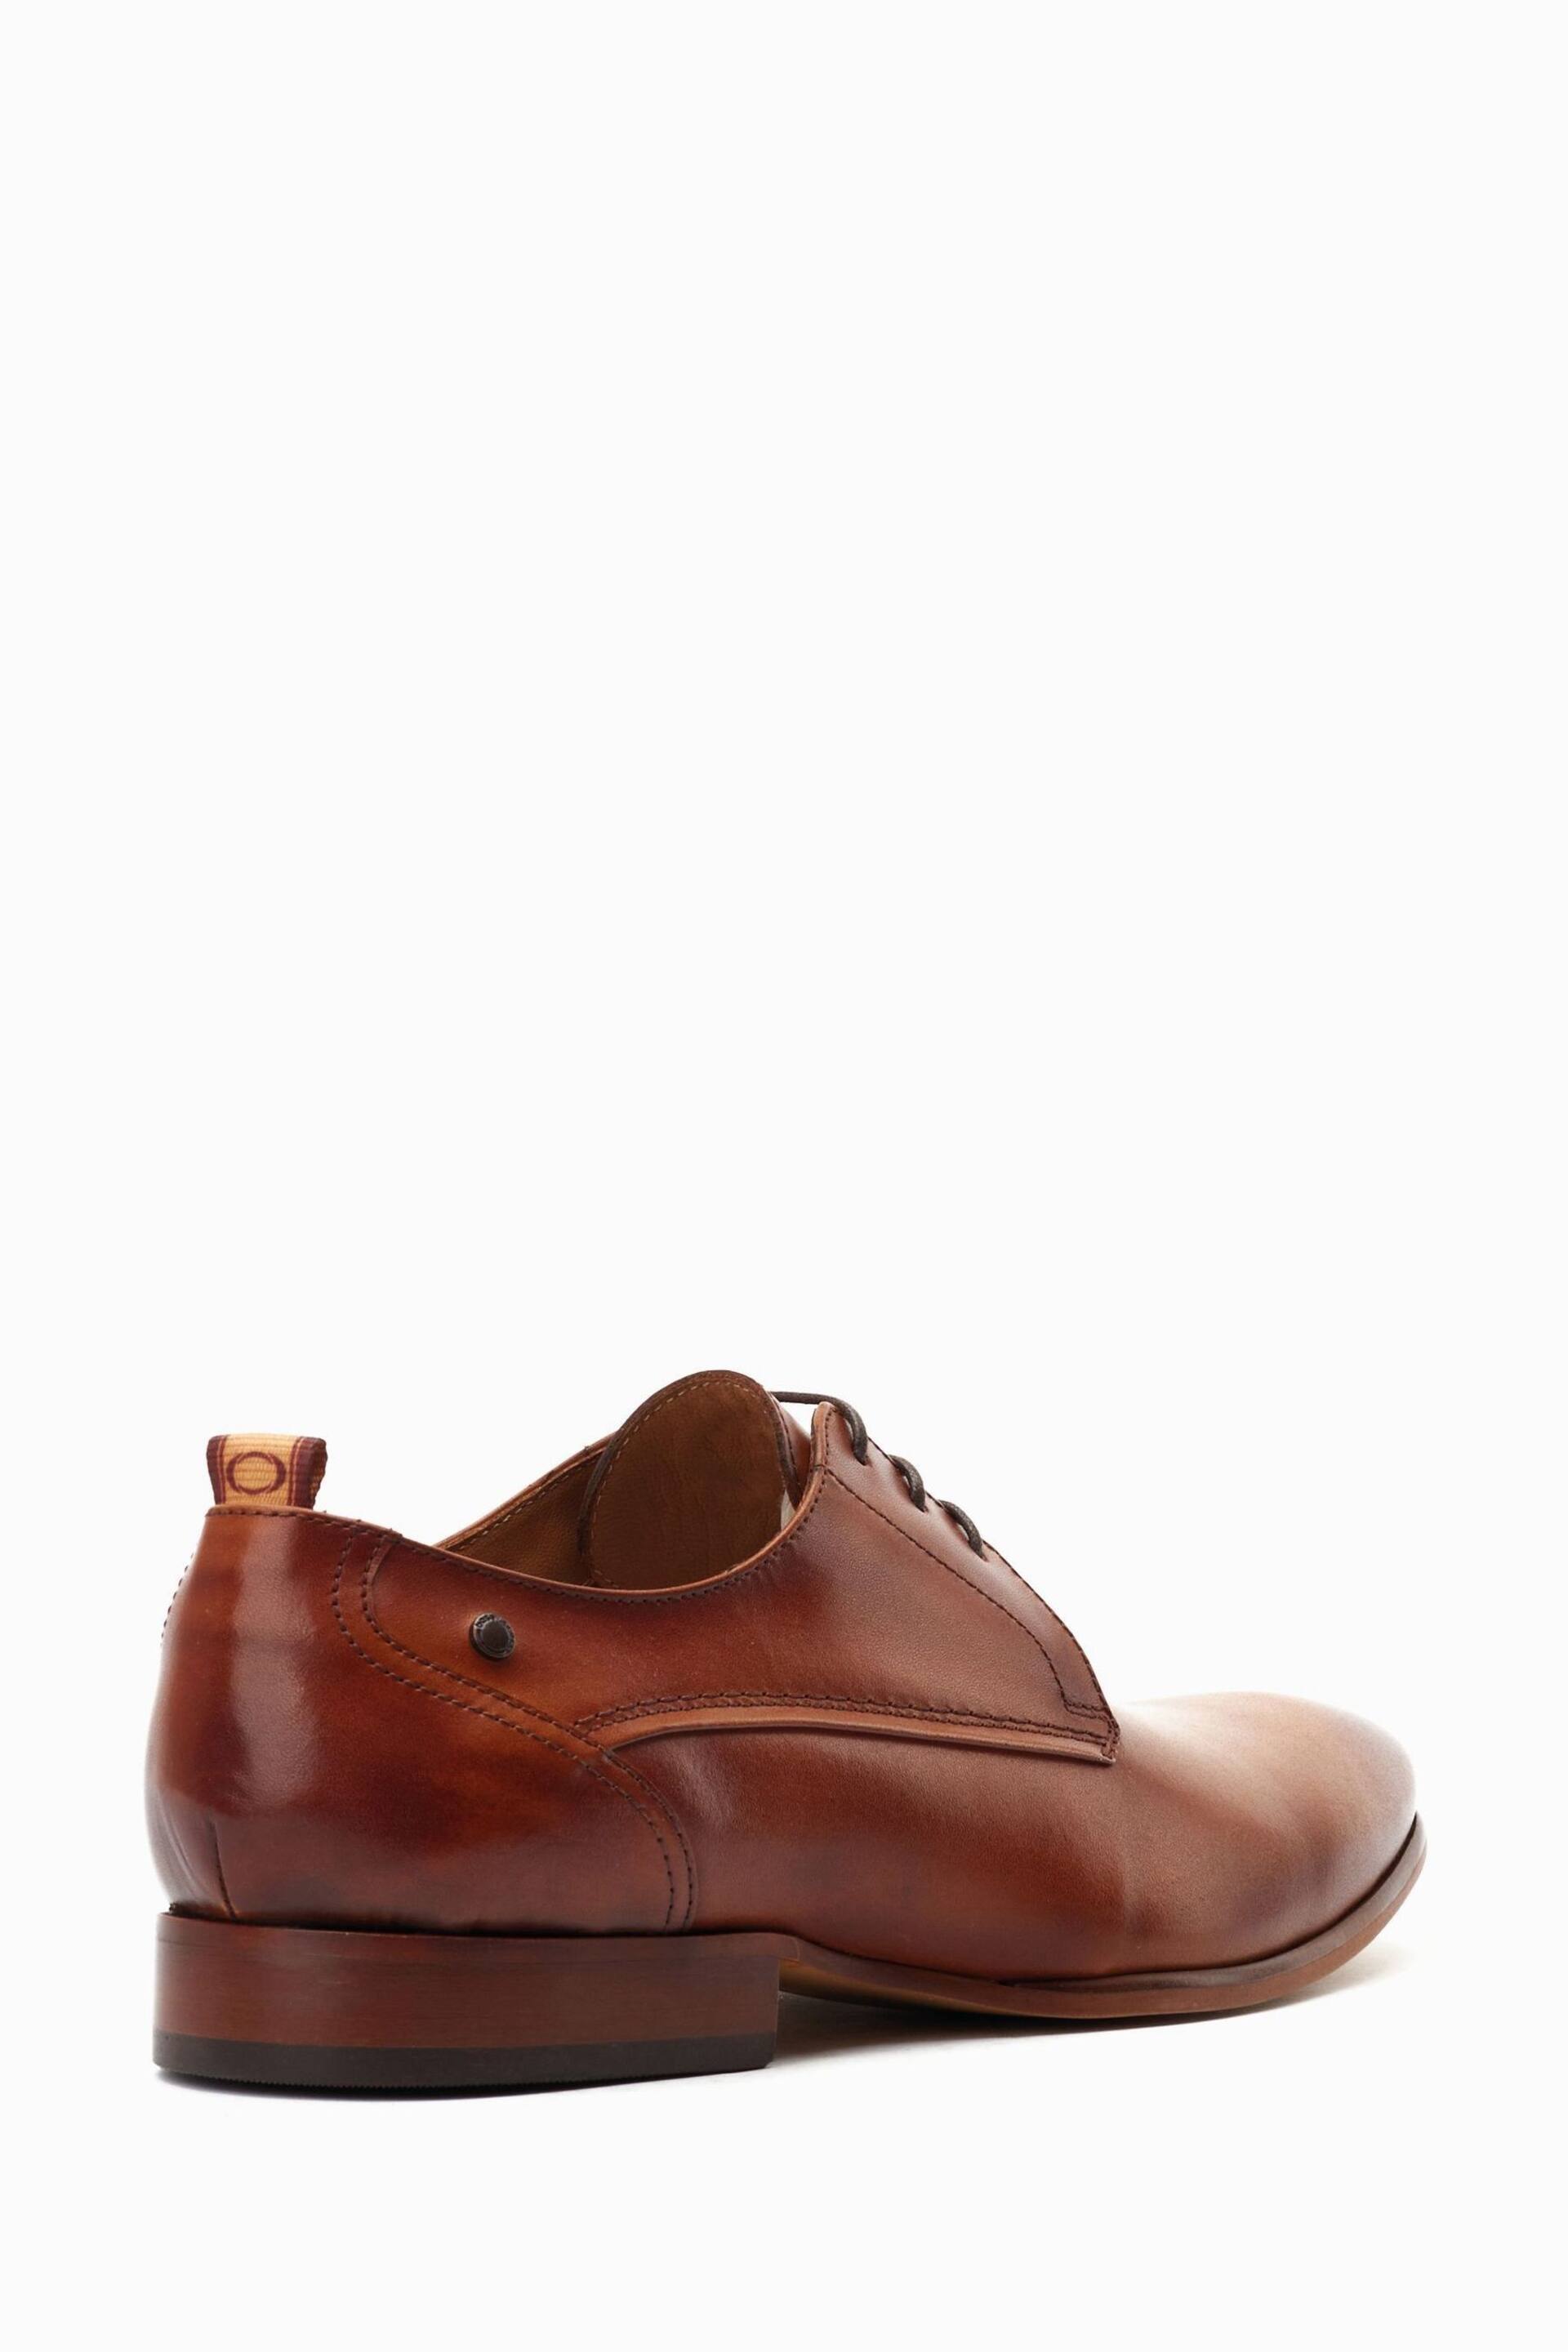 Base London Gambino Lace-Up Derby Shoes - Image 2 of 6